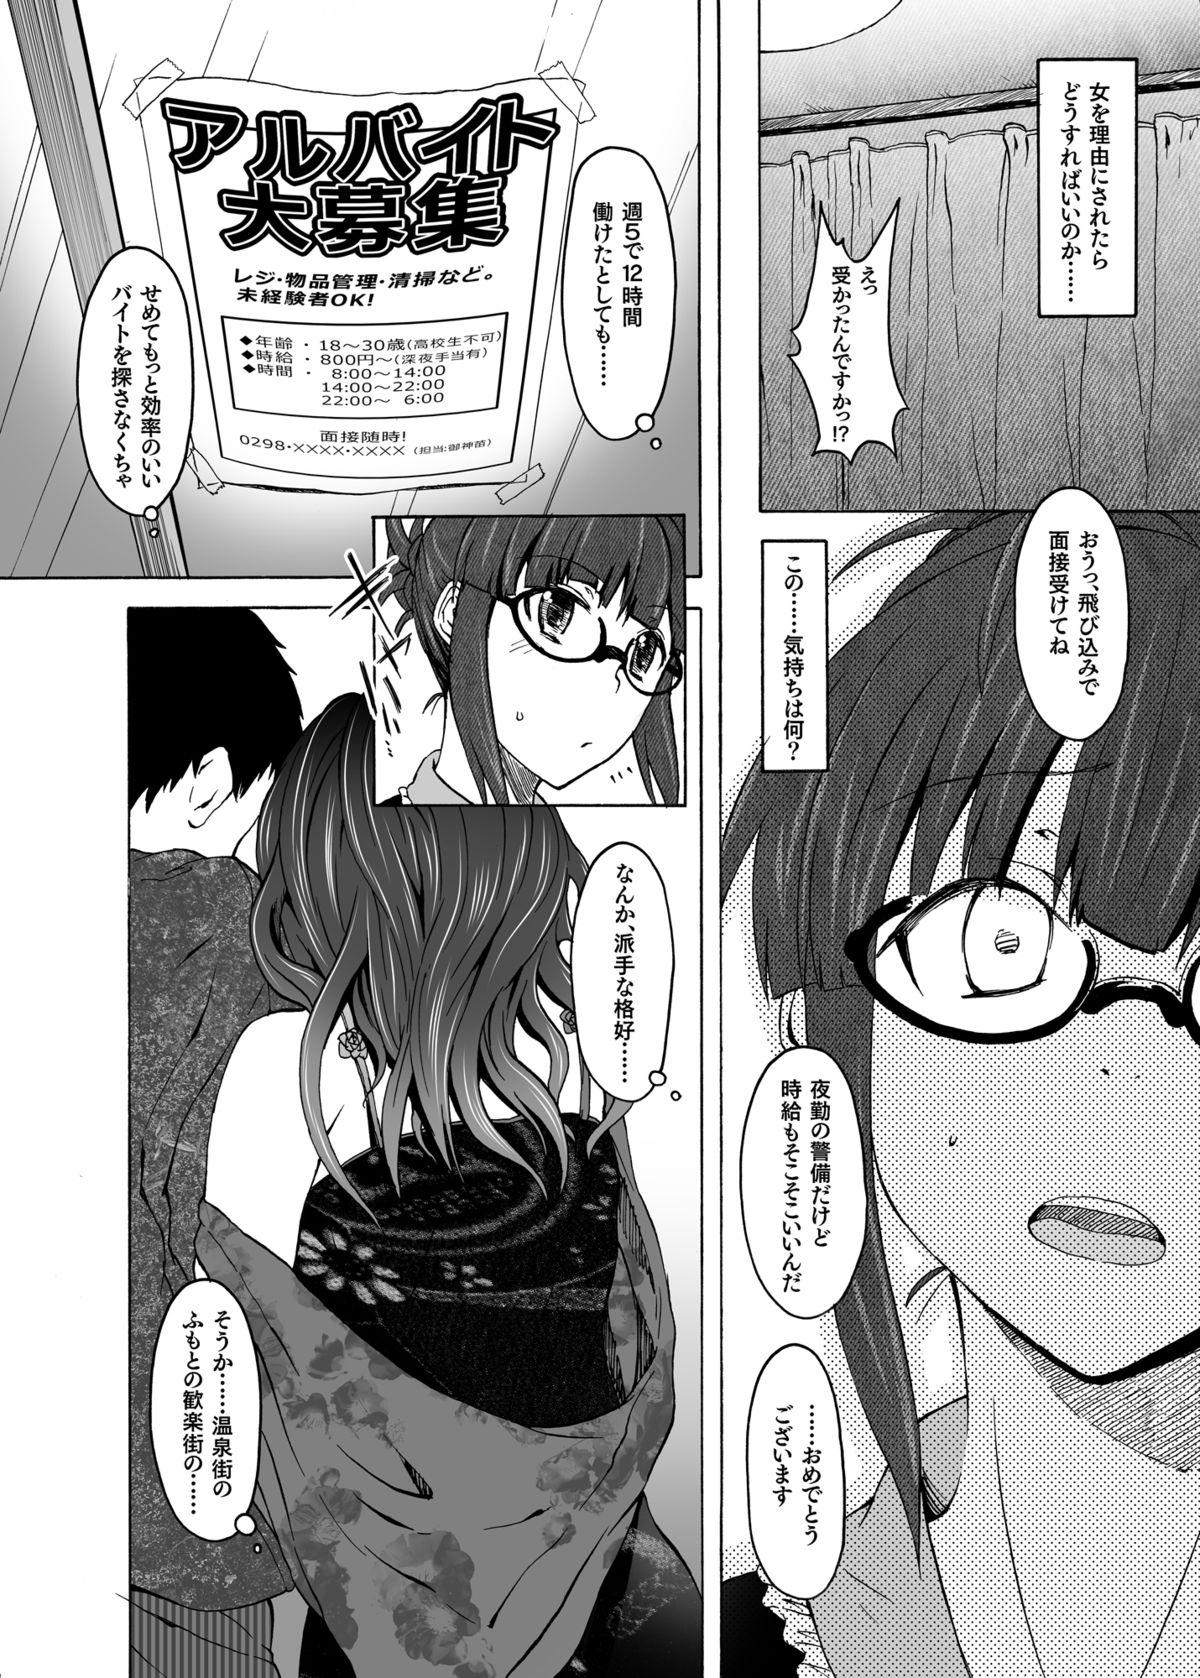 Old Kore ga Sore? - The idolmaster Oral Sex Porn - Page 6